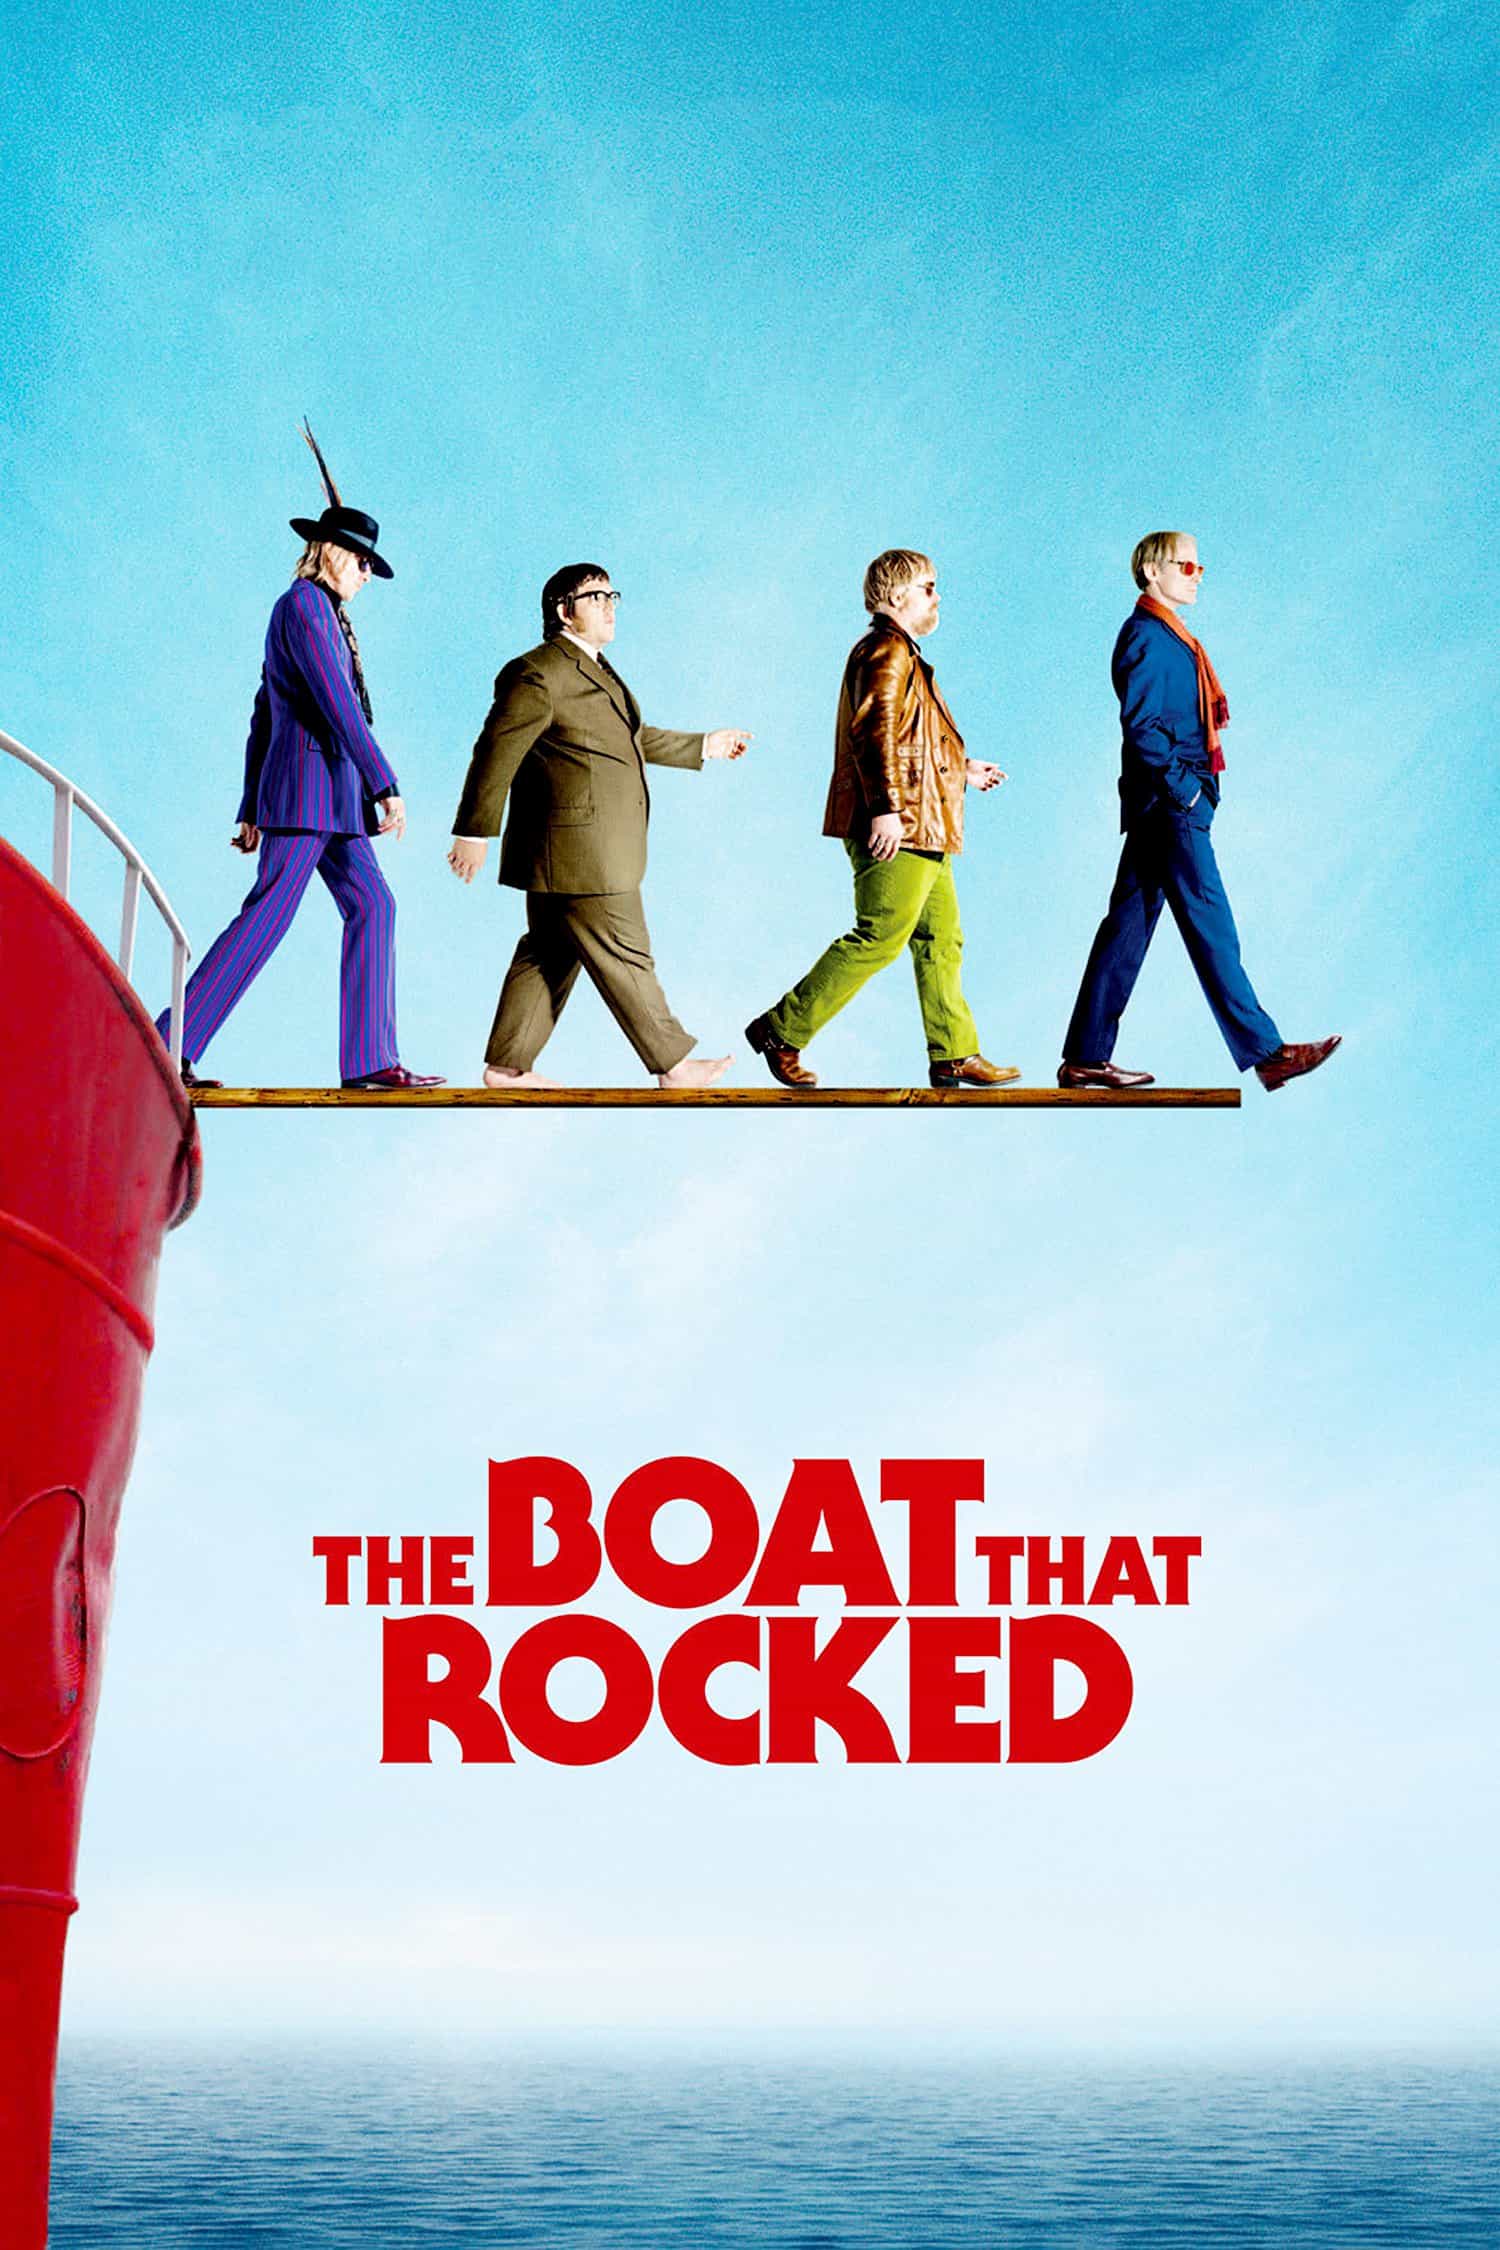 The Boat That Rocked, 2009 